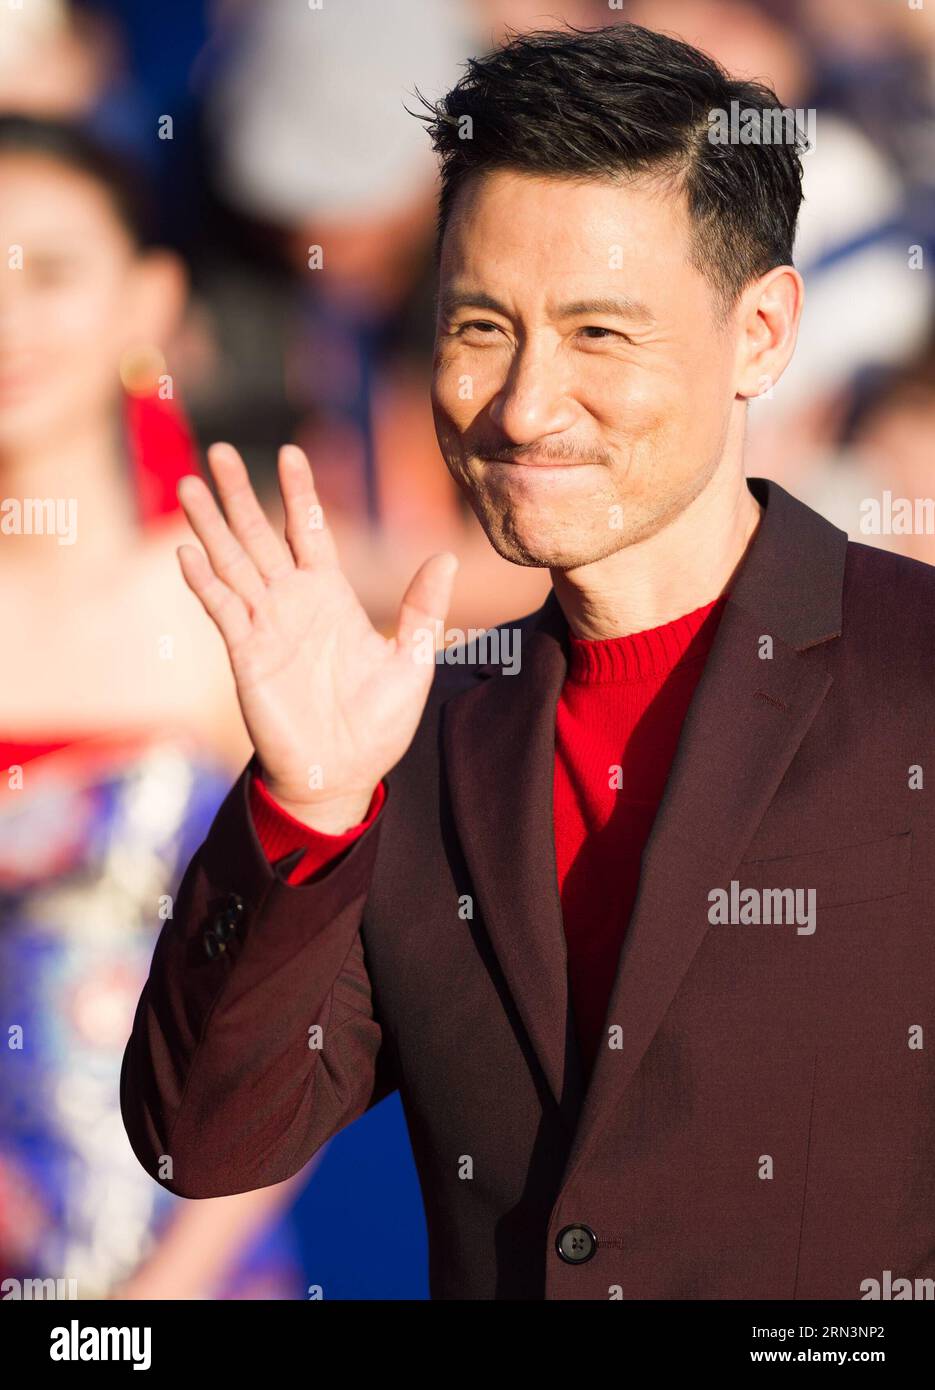 (150423) -- BEIJING, April 23, 2015 -- Actor Jacky Cheung attends the closing ceremony of the fifth Beijing International Film Festival (BJIFF) in Beijing, capital of China, April 23, 2015. The BJIFF closed here on Thursday. ) (mp) CHINA-BEIJING-FILM FESTIVAL-CLOSING (CN) LixRenzi PUBLICATIONxNOTxINxCHN   Beijing April 23 2015 Actor Jacky Cheung Attends The CLOSING Ceremony of The Fifth Beijing International Film Festival  in Beijing Capital of China April 23 2015 The  Closed Here ON Thursday MP China Beijing Film Festival CLOSING CN  PUBLICATIONxNOTxINxCHN Stock Photo